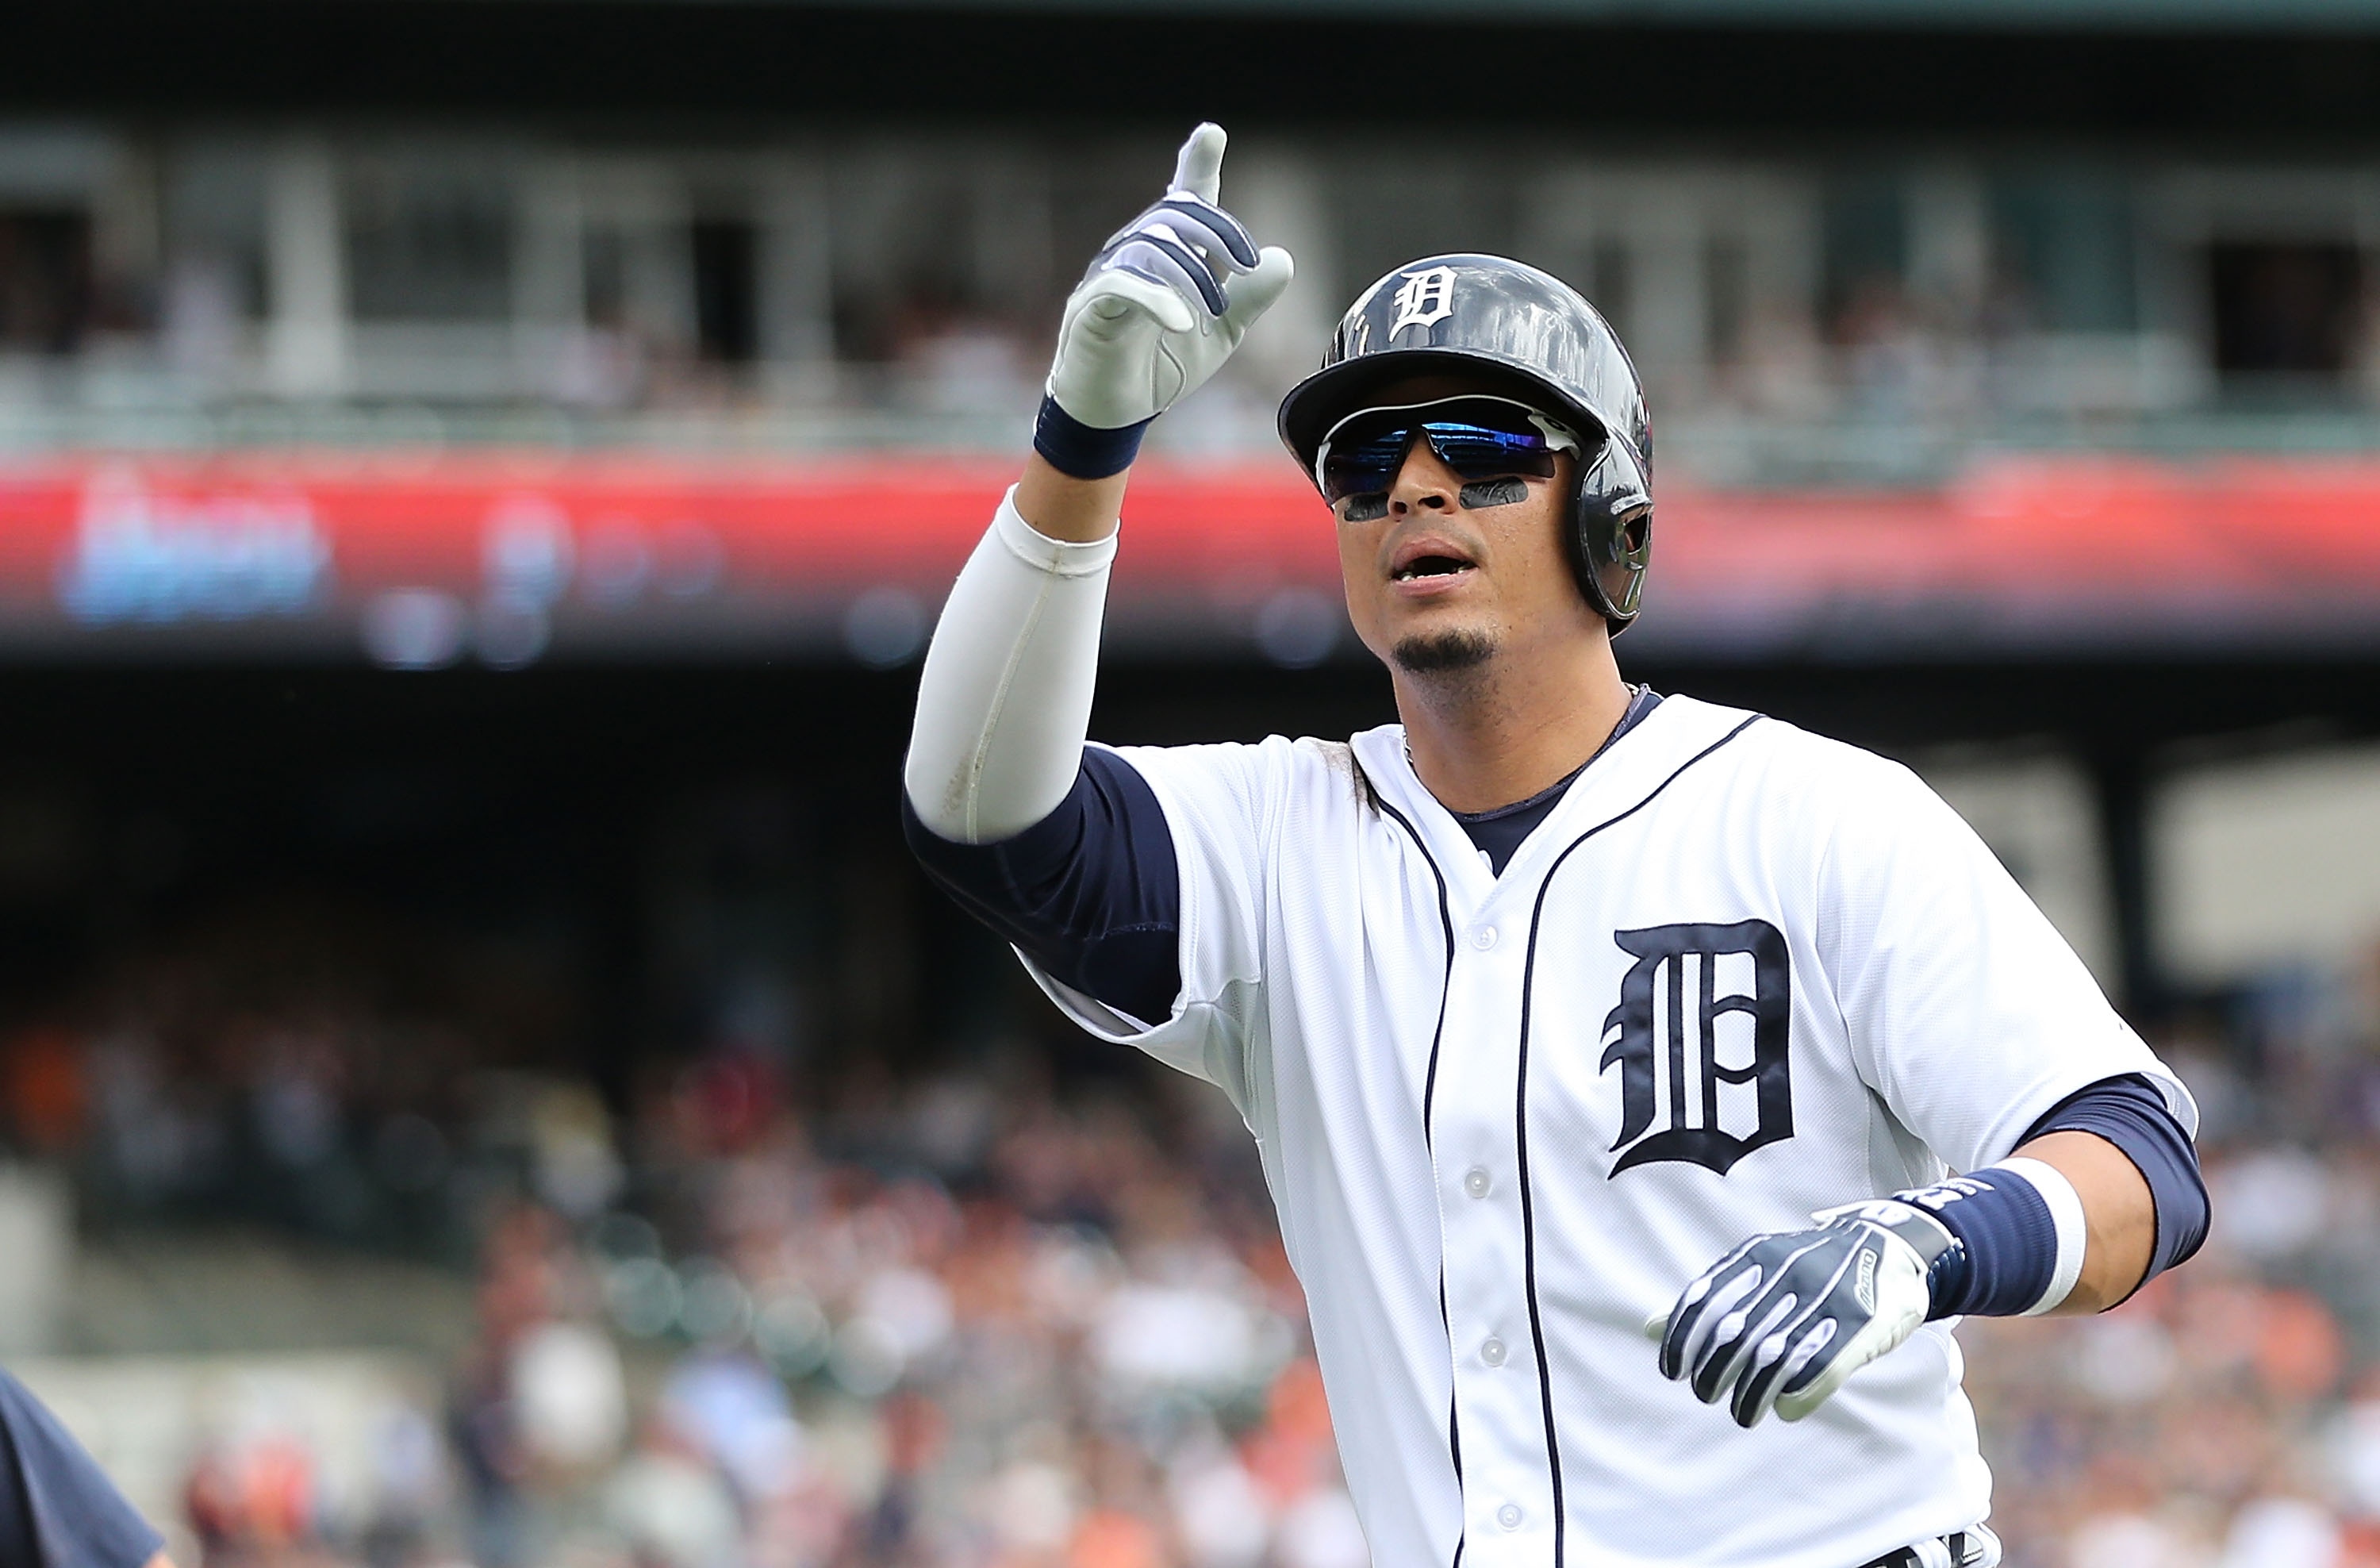 Victor Martinez has been playing like an MVP candidate for the Tigers this season. (Getty Images)